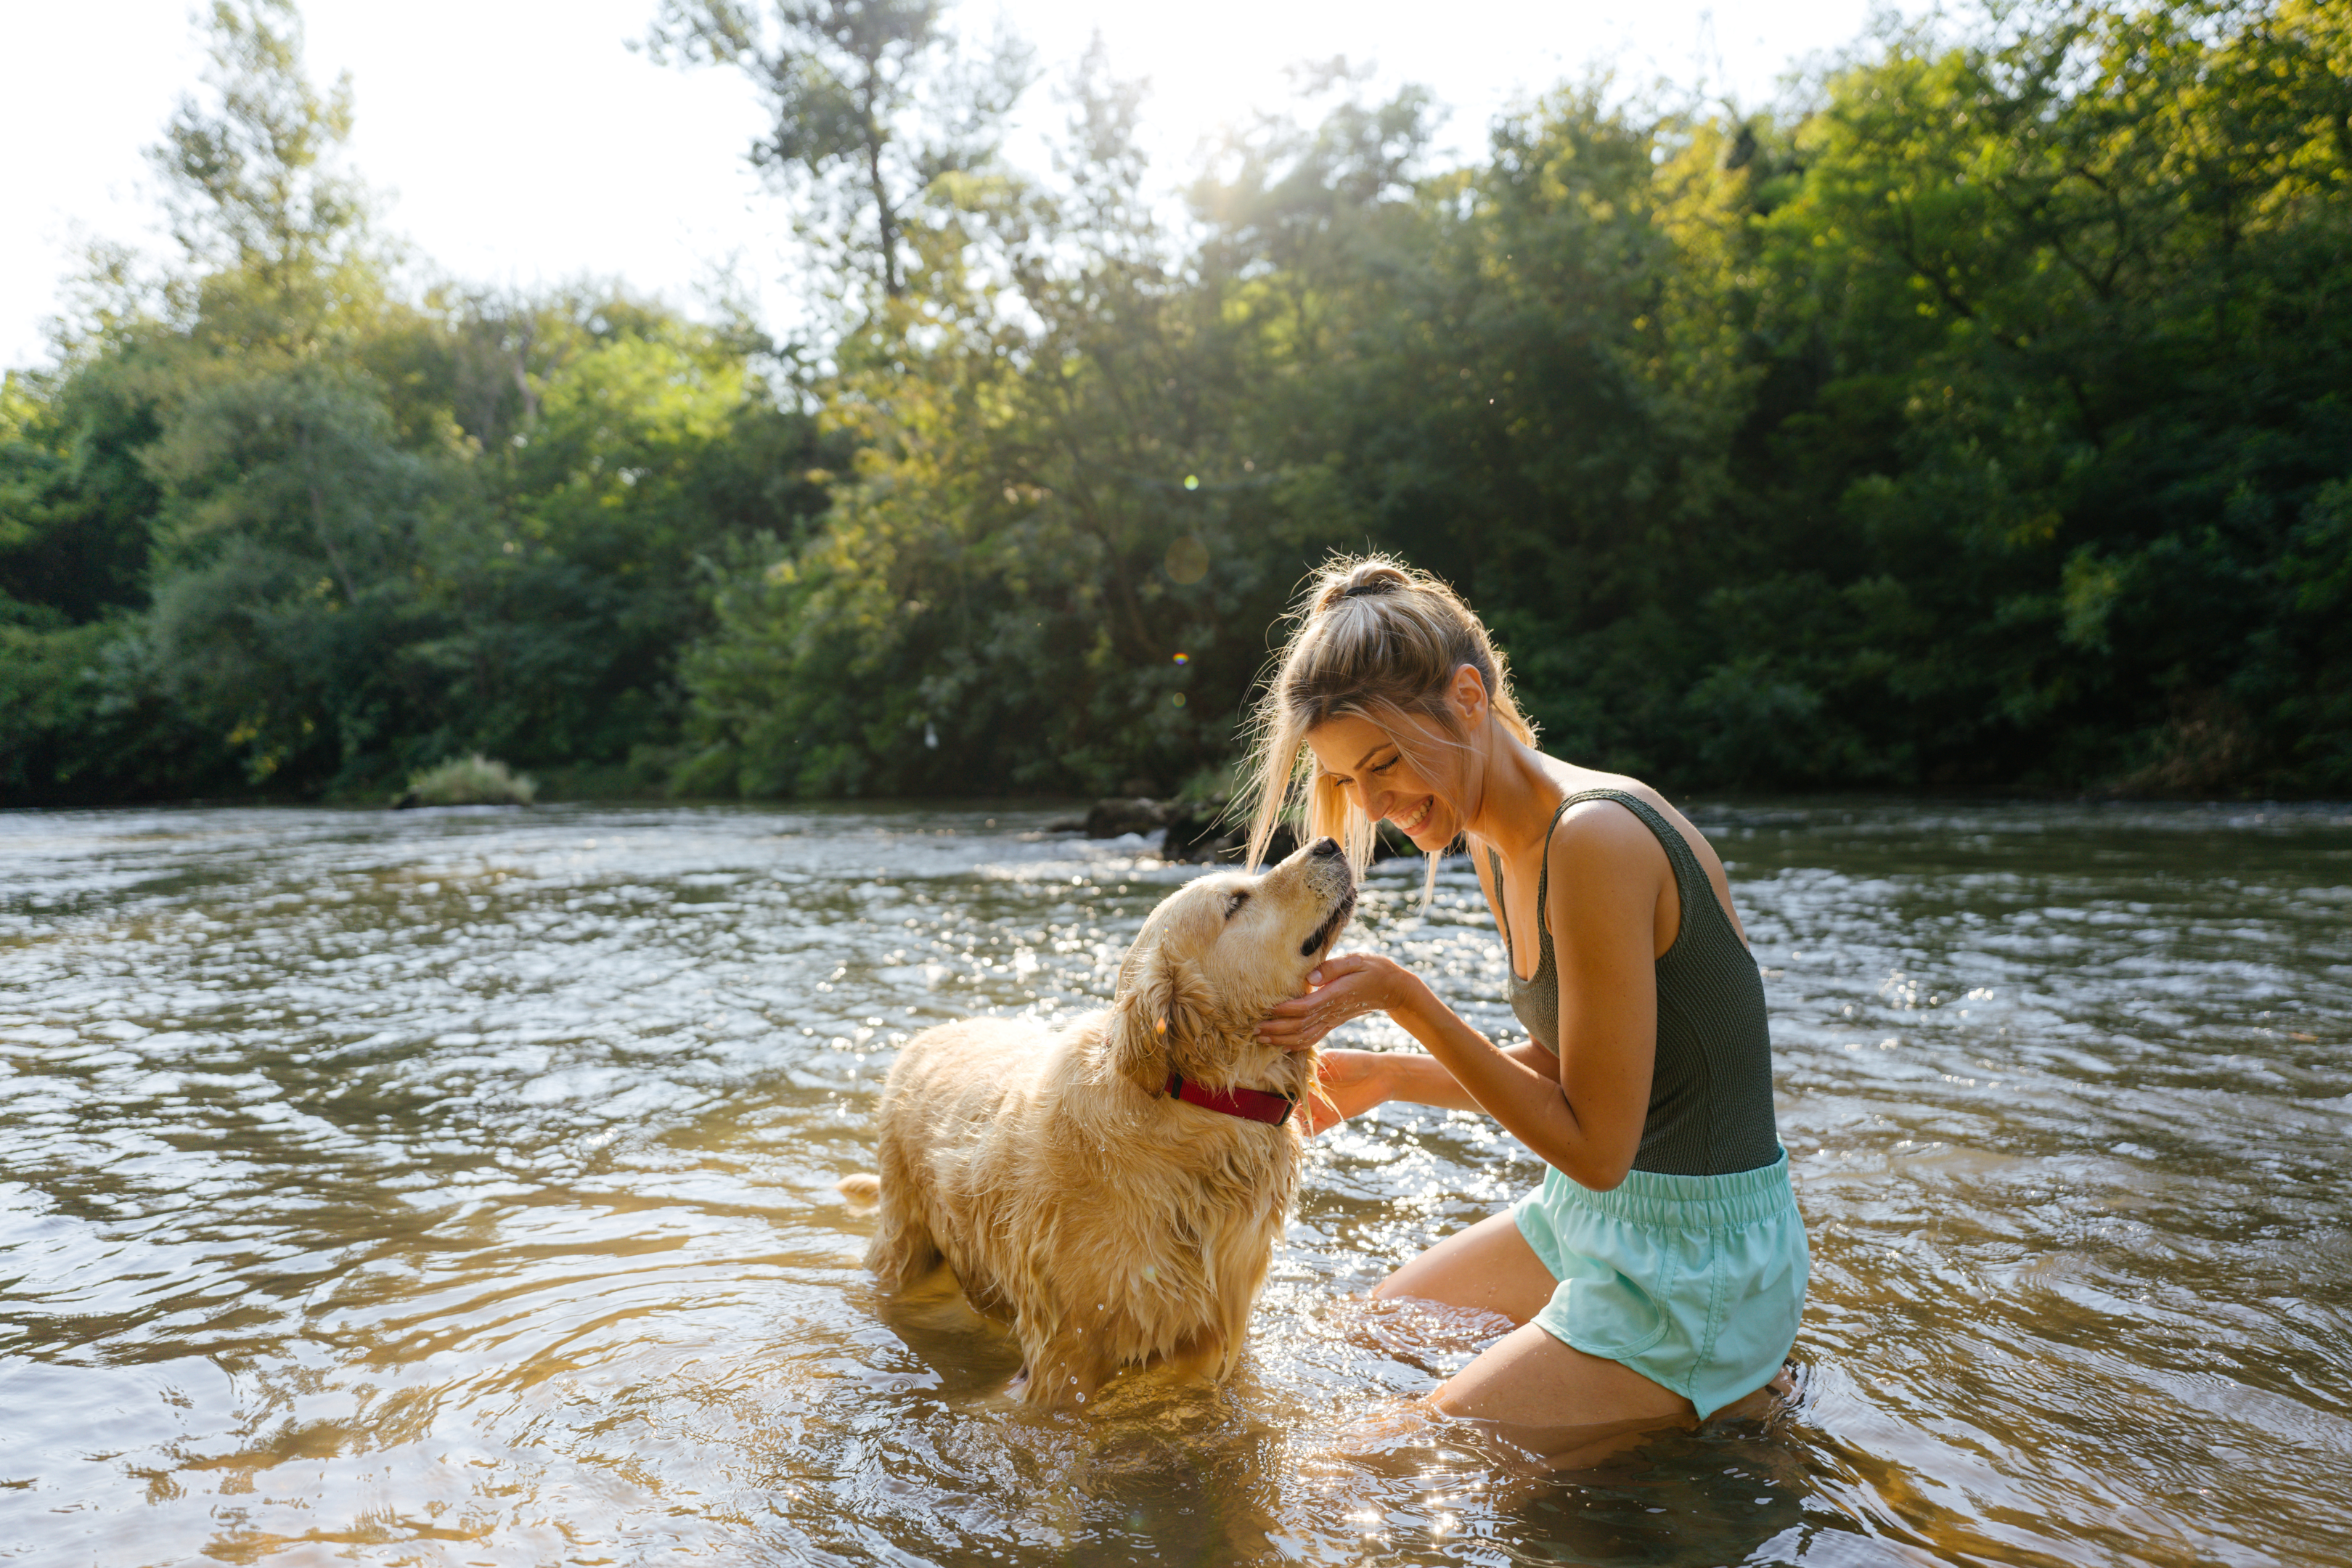 A smiling young woman and her dog splashing in the river